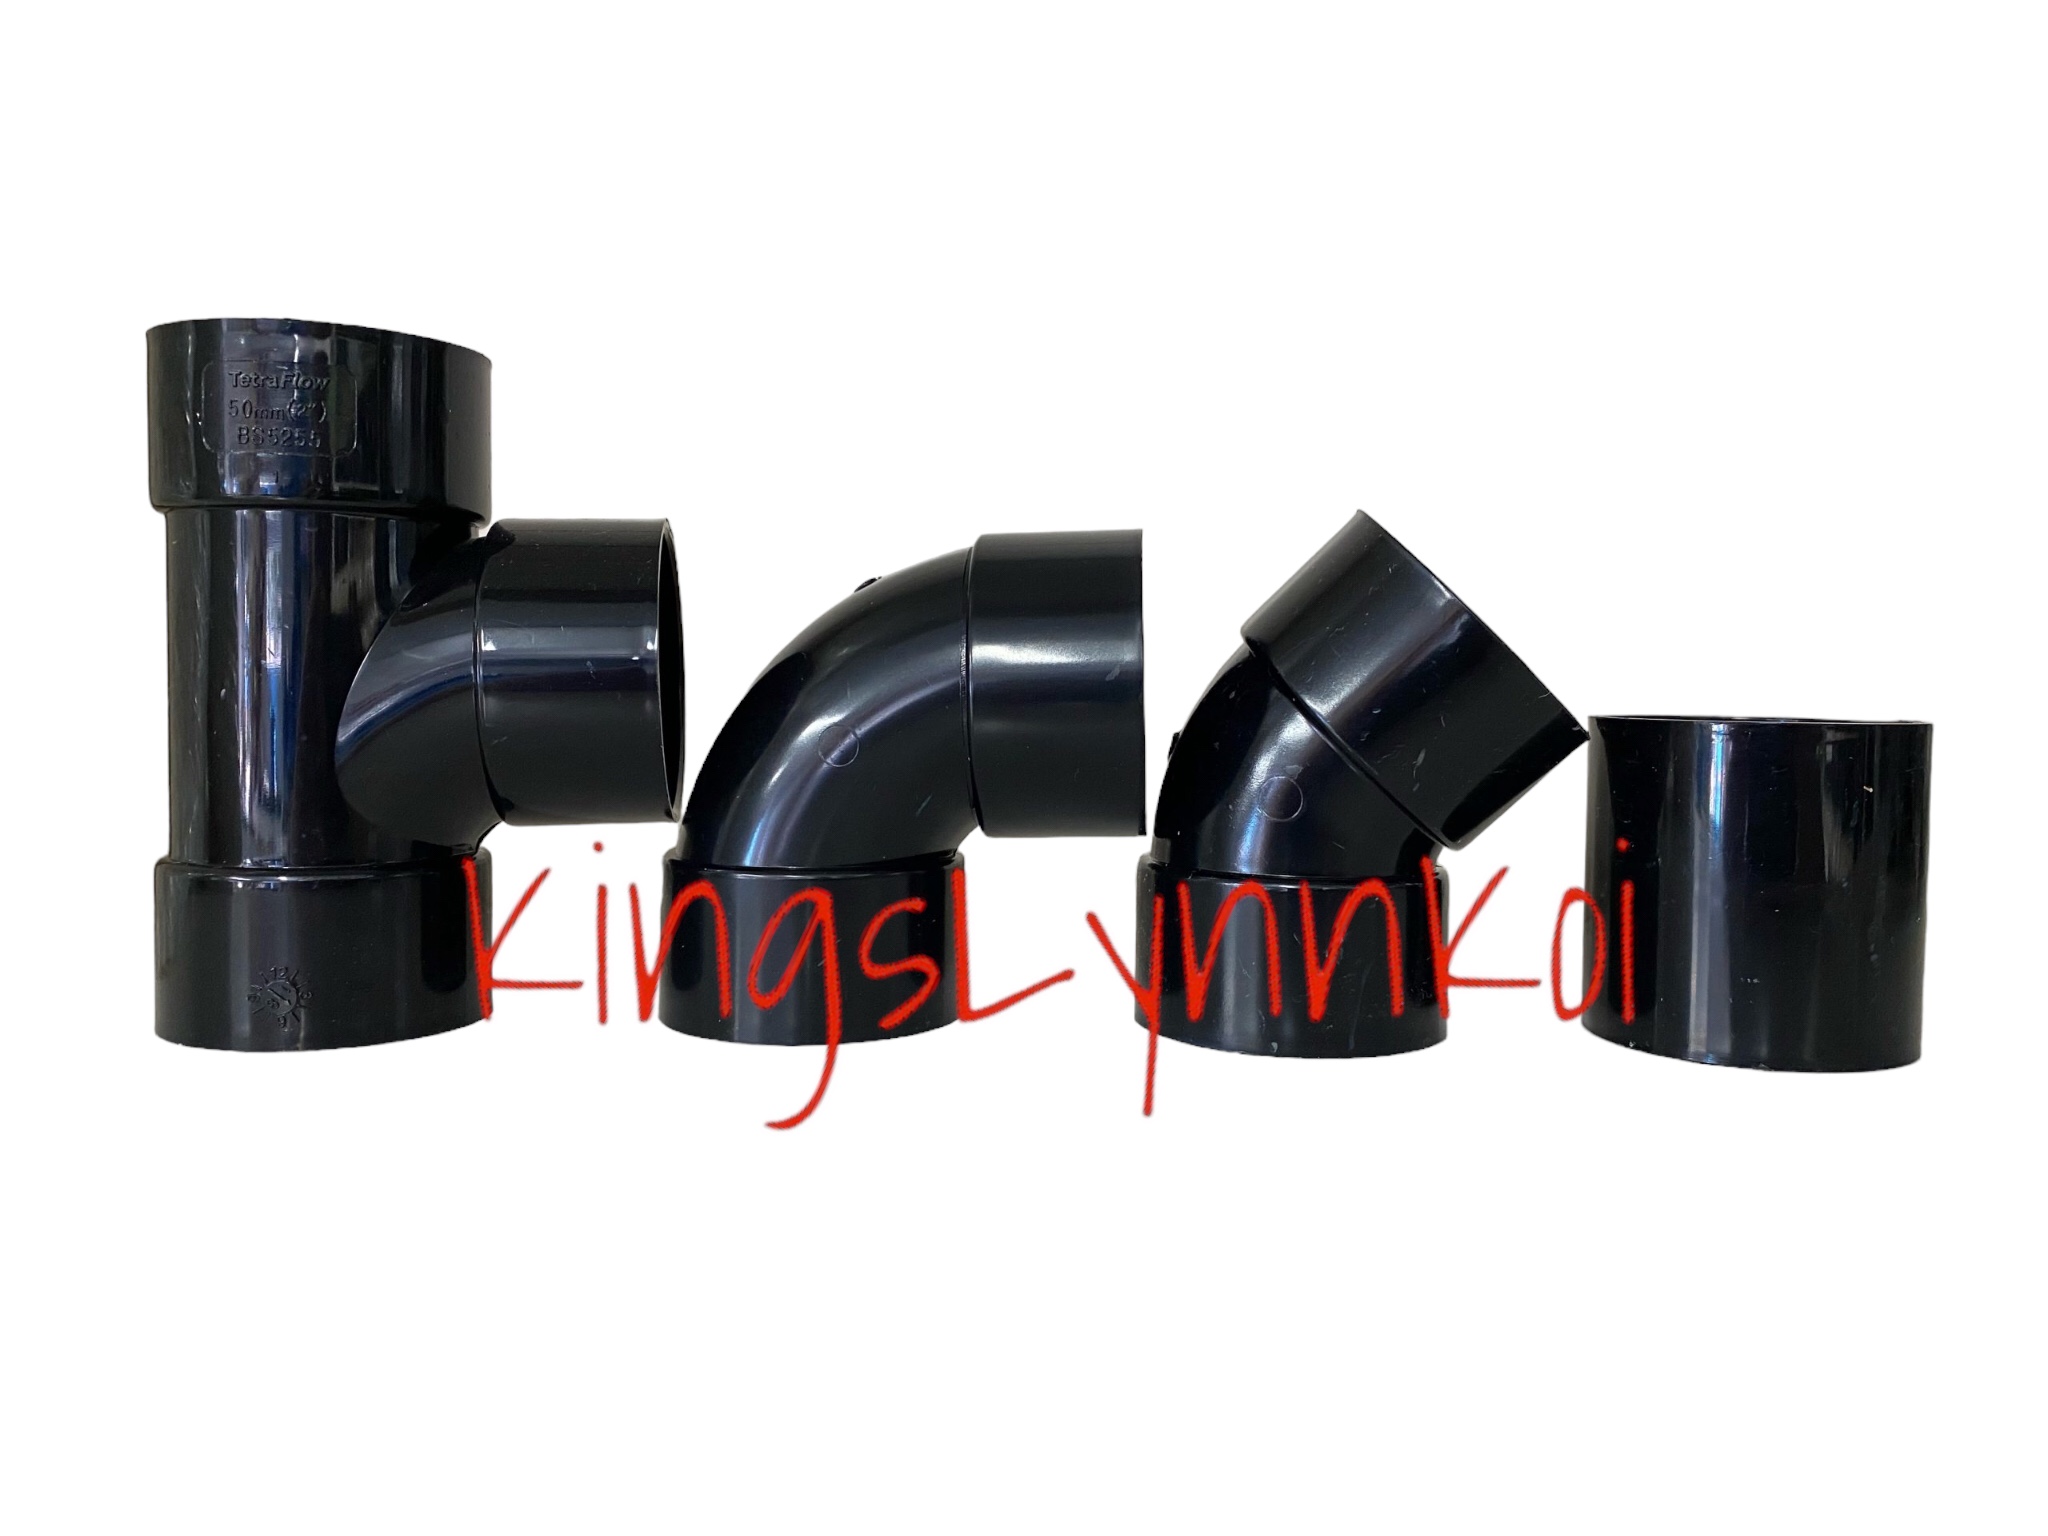 2″ Solvent weld pipe fittings